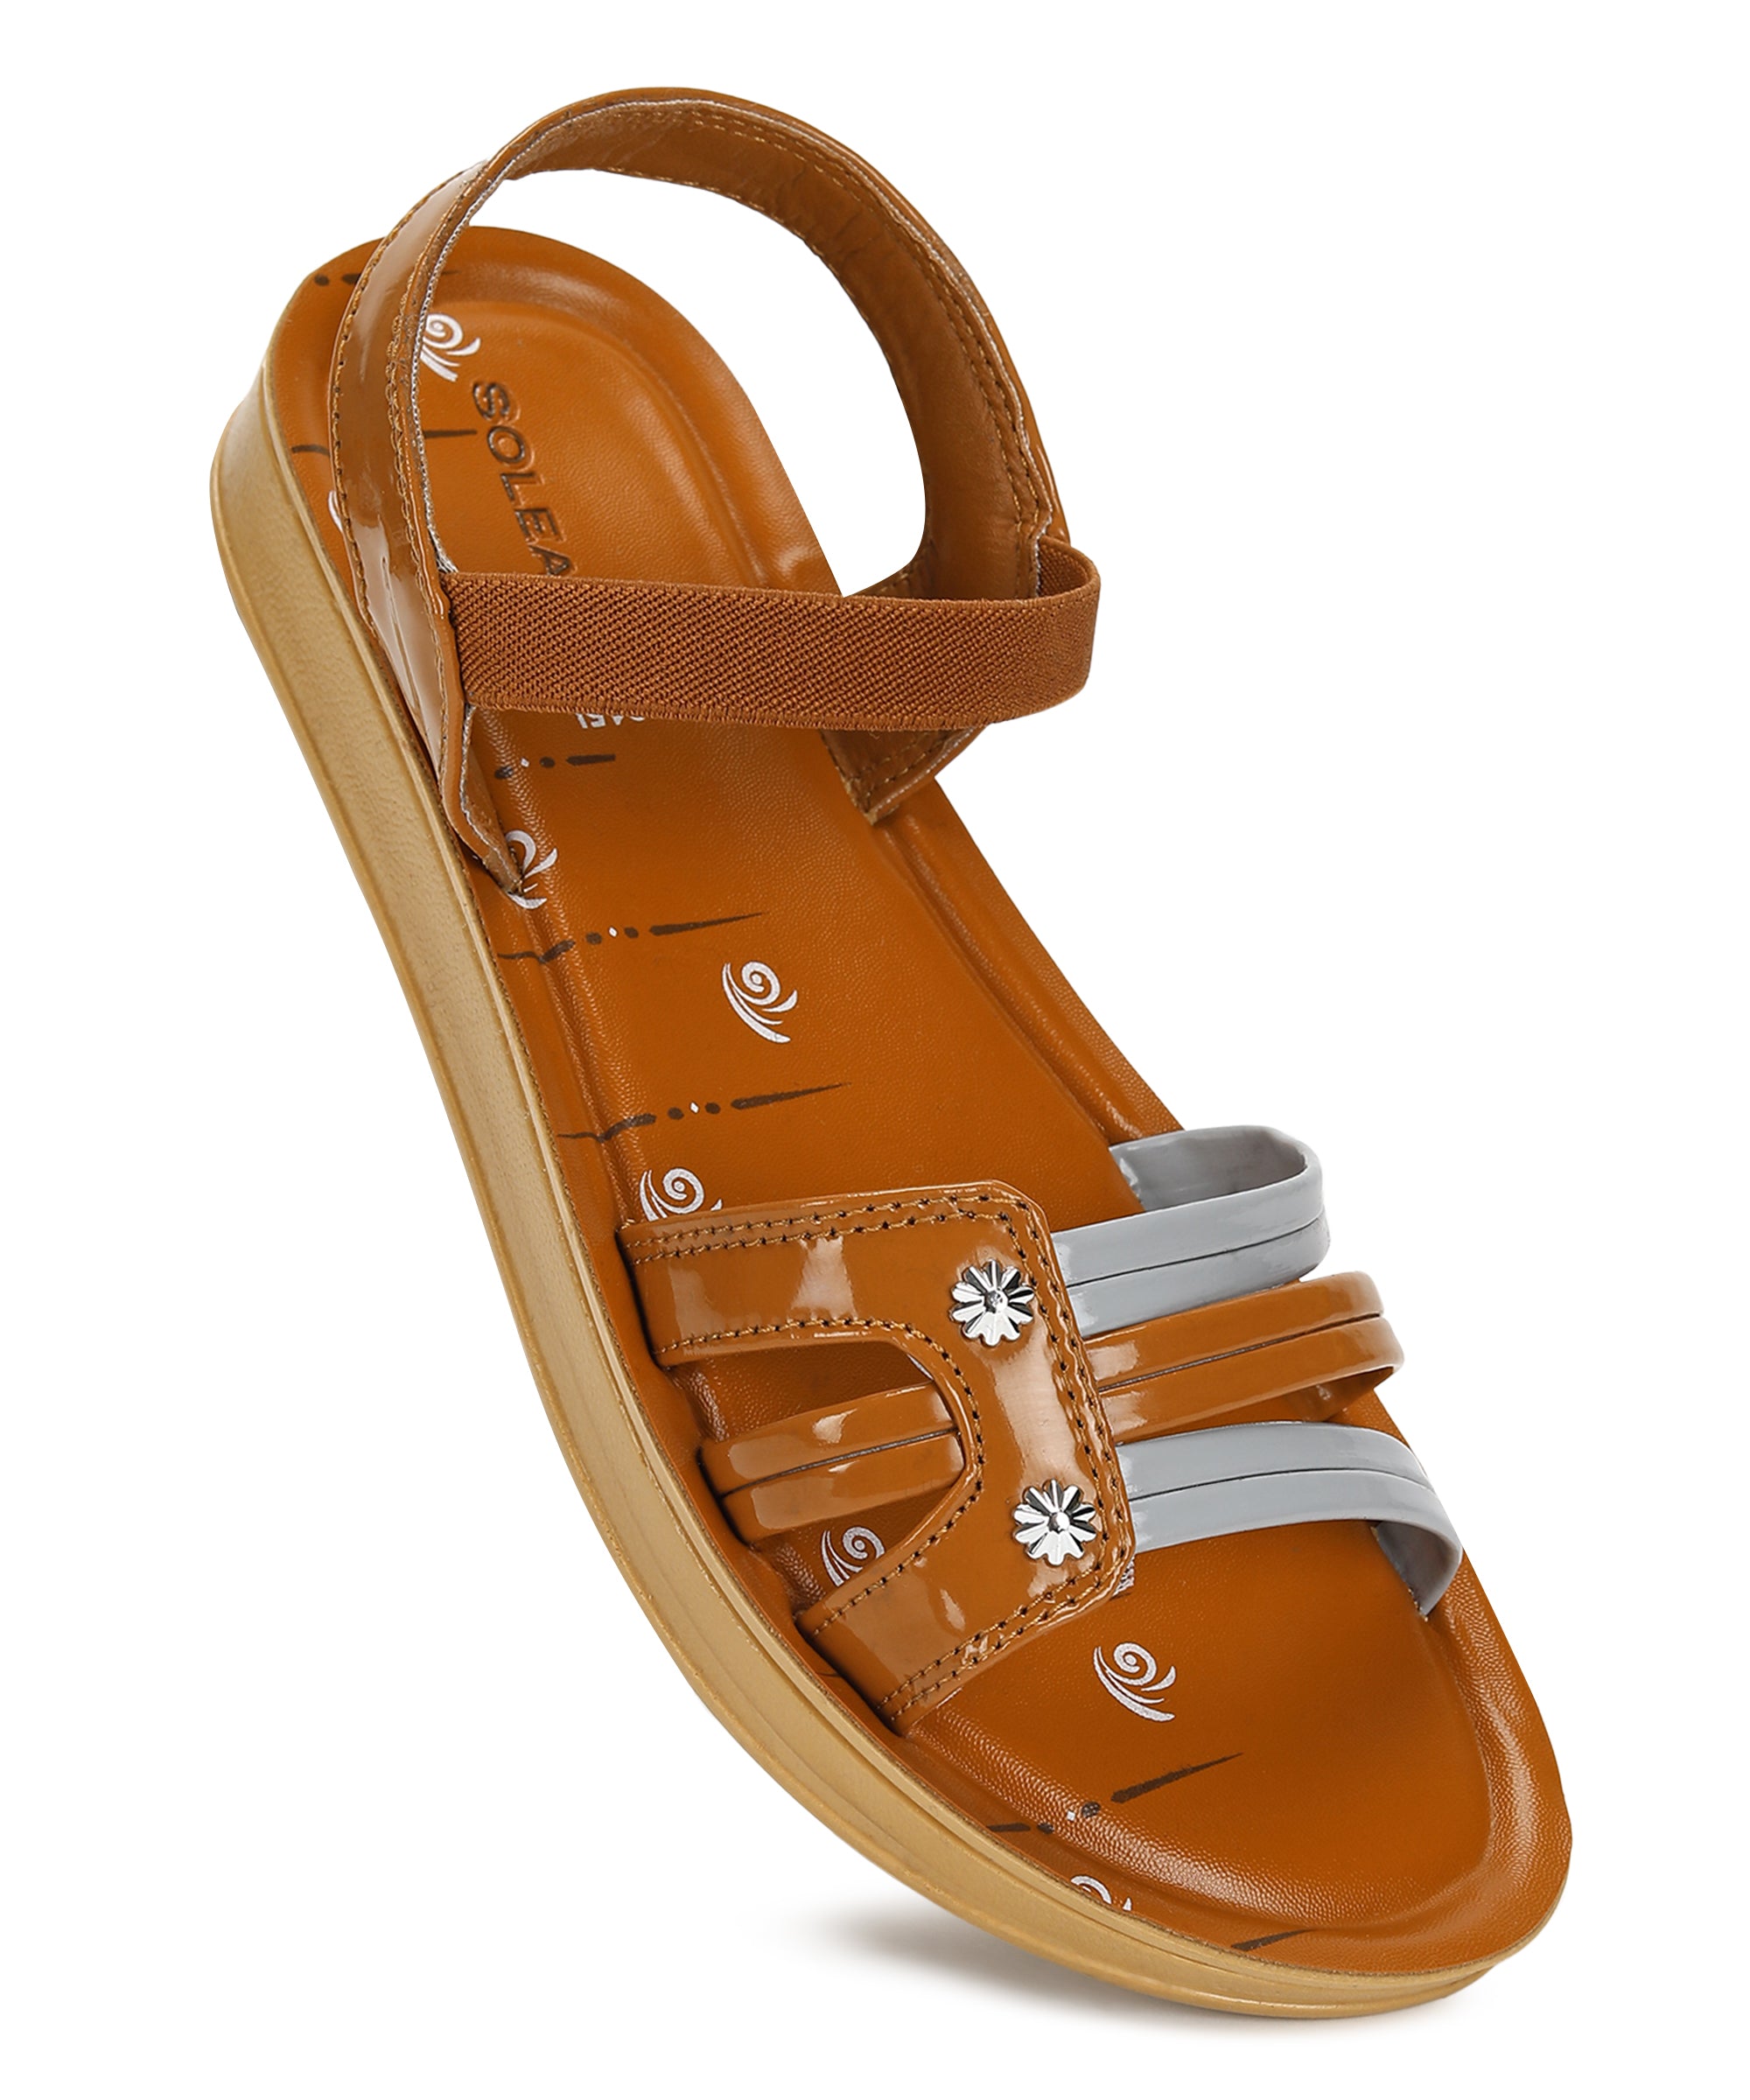 Paragon K7015L Women Sandals | Casual &amp; Formal Sandals | Stylish, Comfortable &amp; Durable | For Daily &amp; Occasion Wear